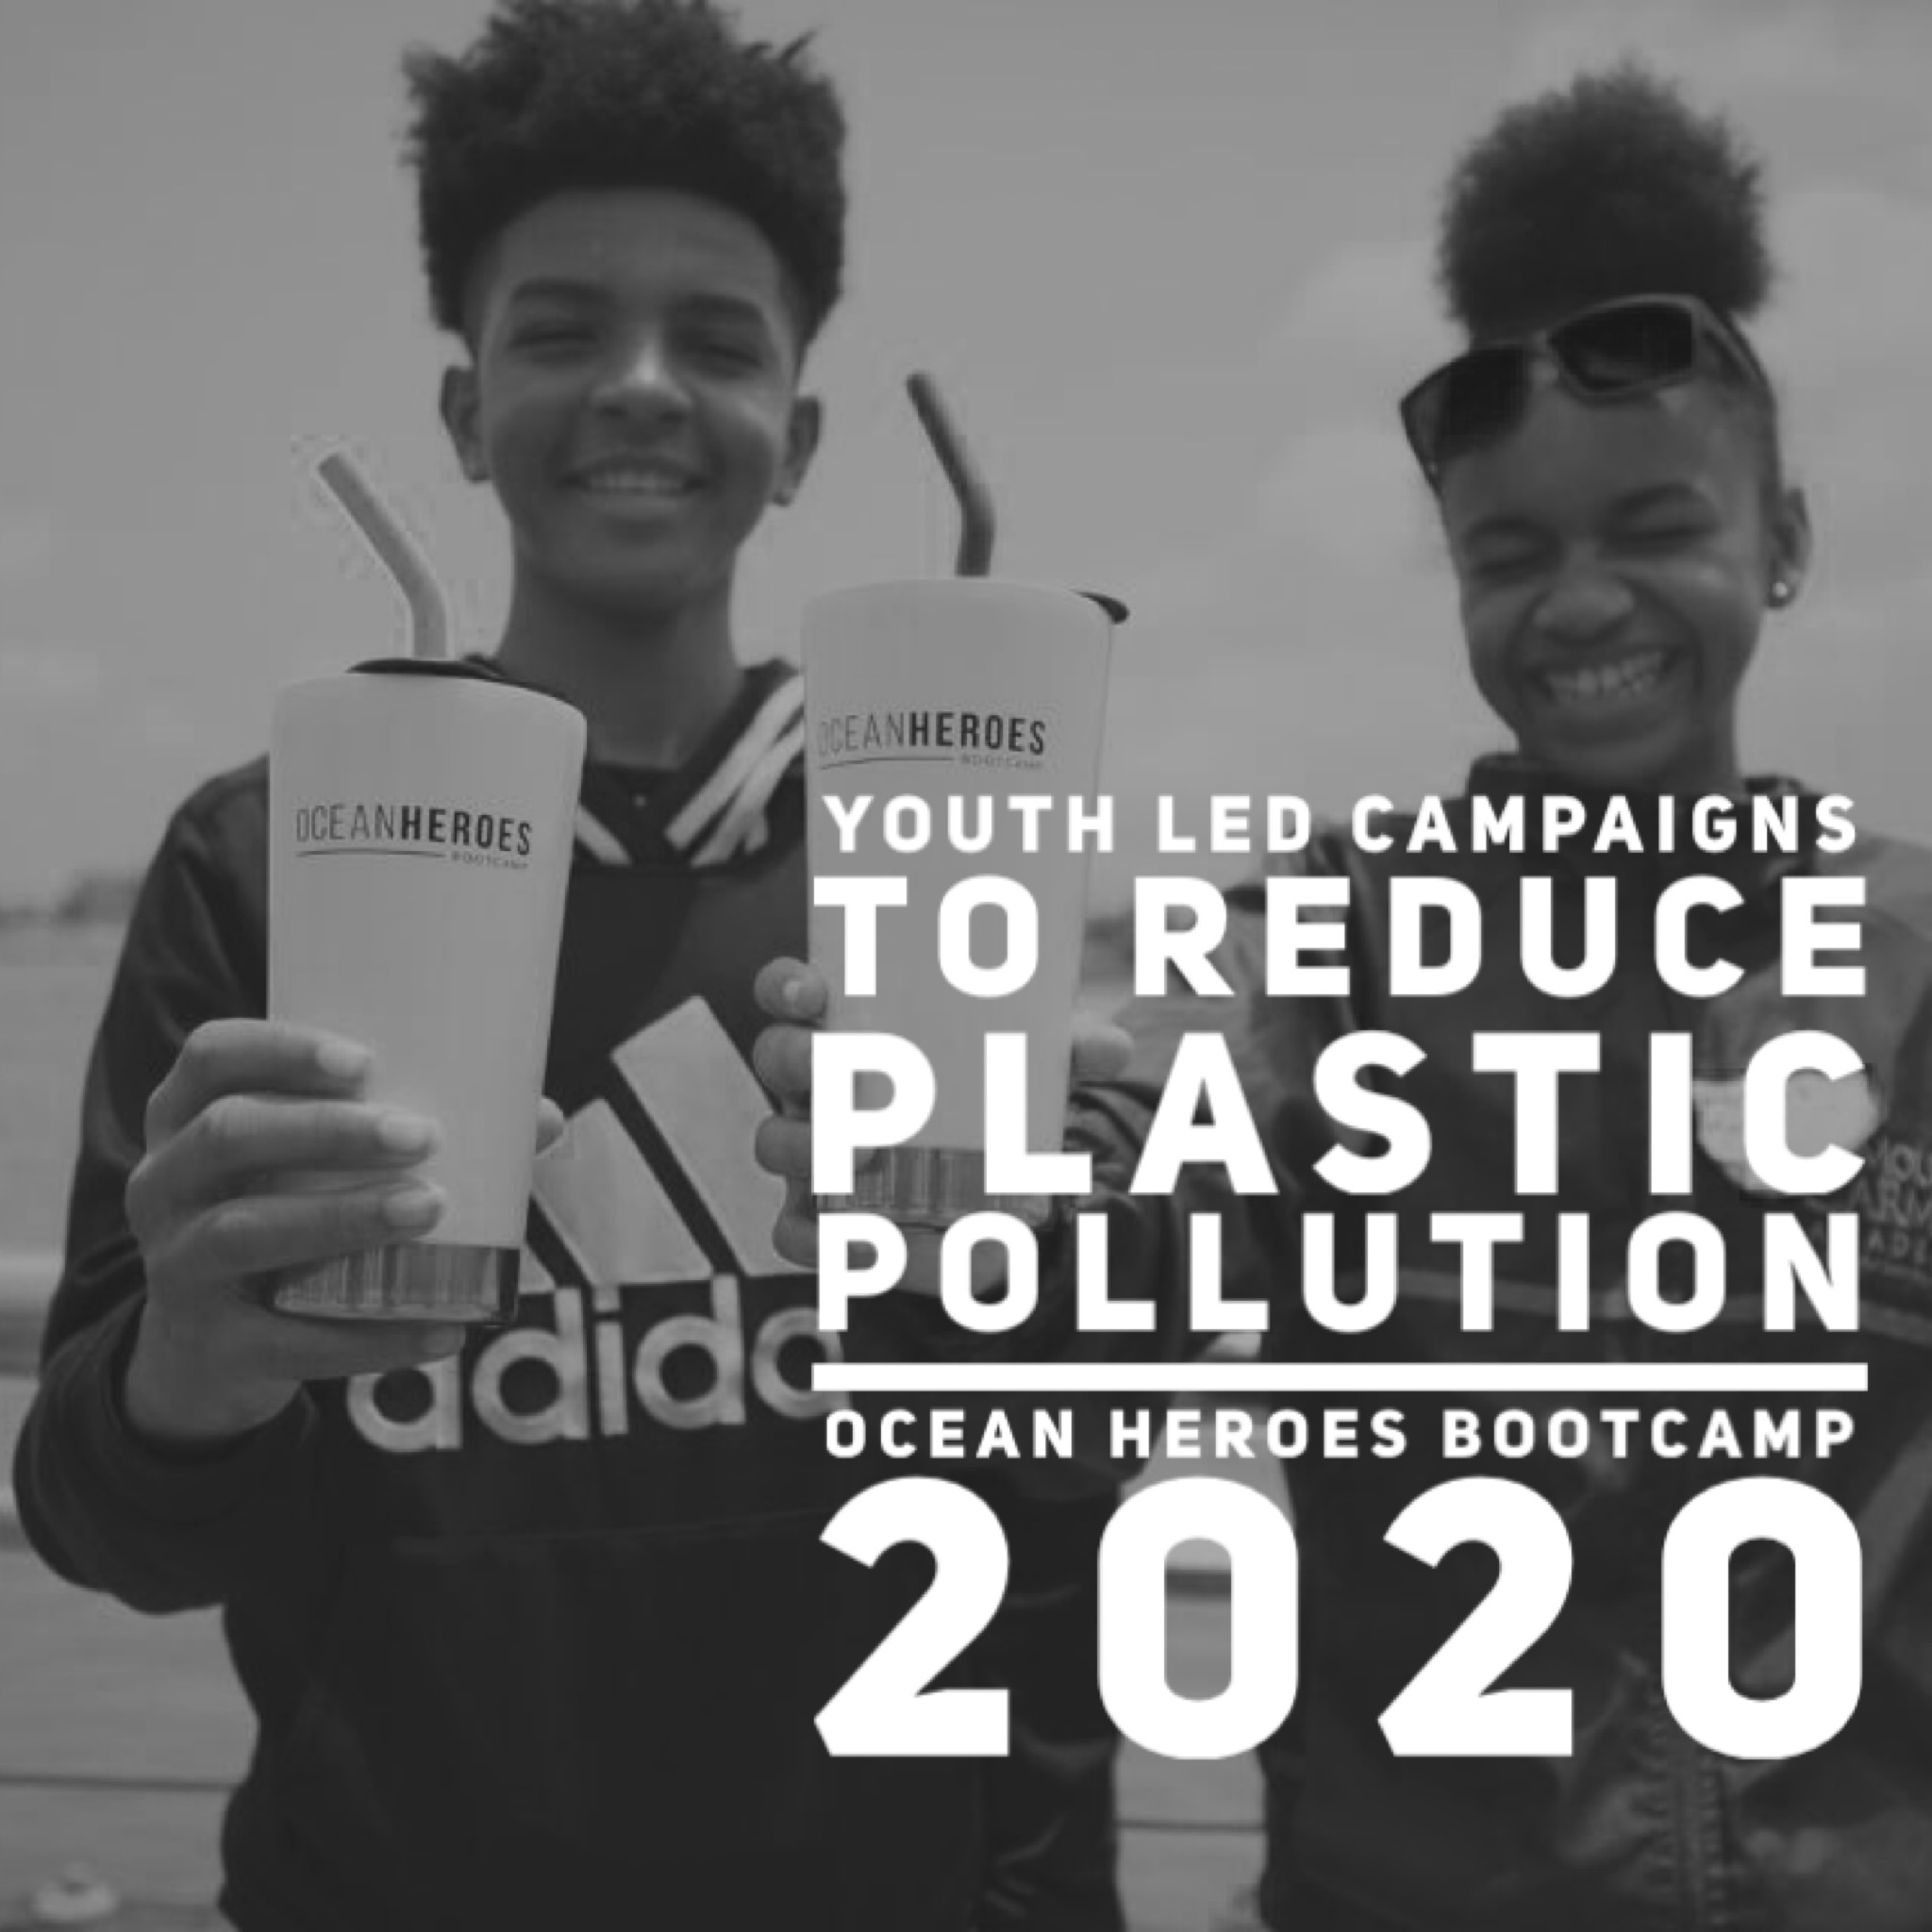 Ocean Heros Bootcamp Young Activists Plastic Pollution Change Campaigns